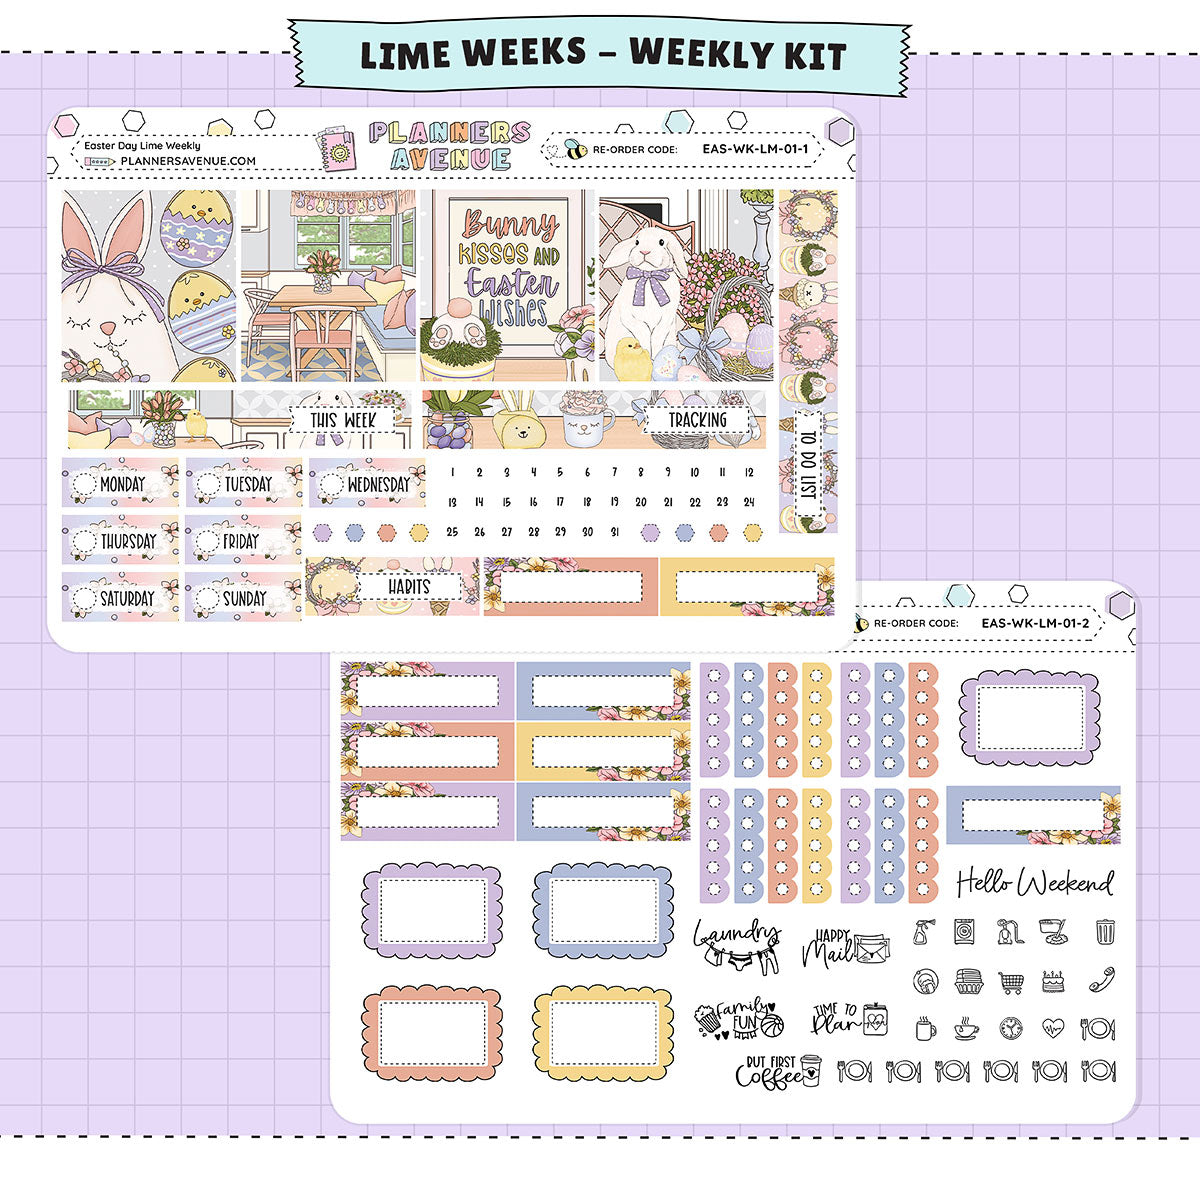 Easter Day Lime Weekly Planner Sticker Foiled Kit (GOLD FOIL)